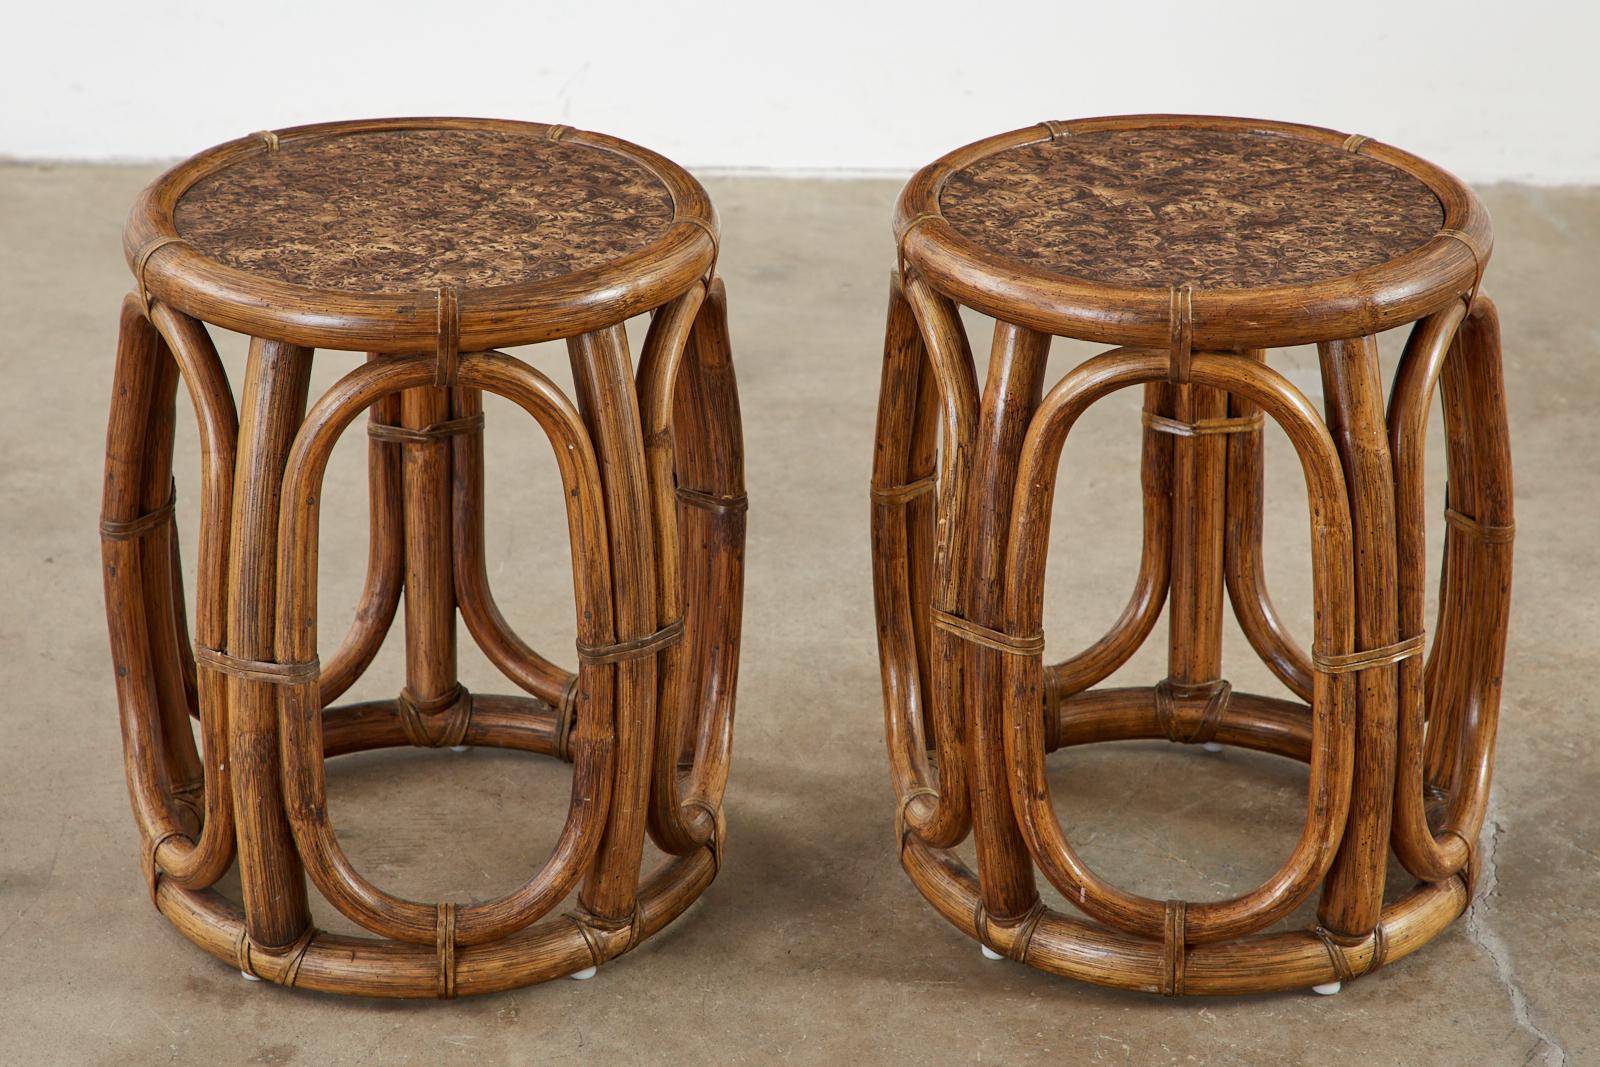 American Pair of McGuire Bamboo Rattan Stools or Drink Tables